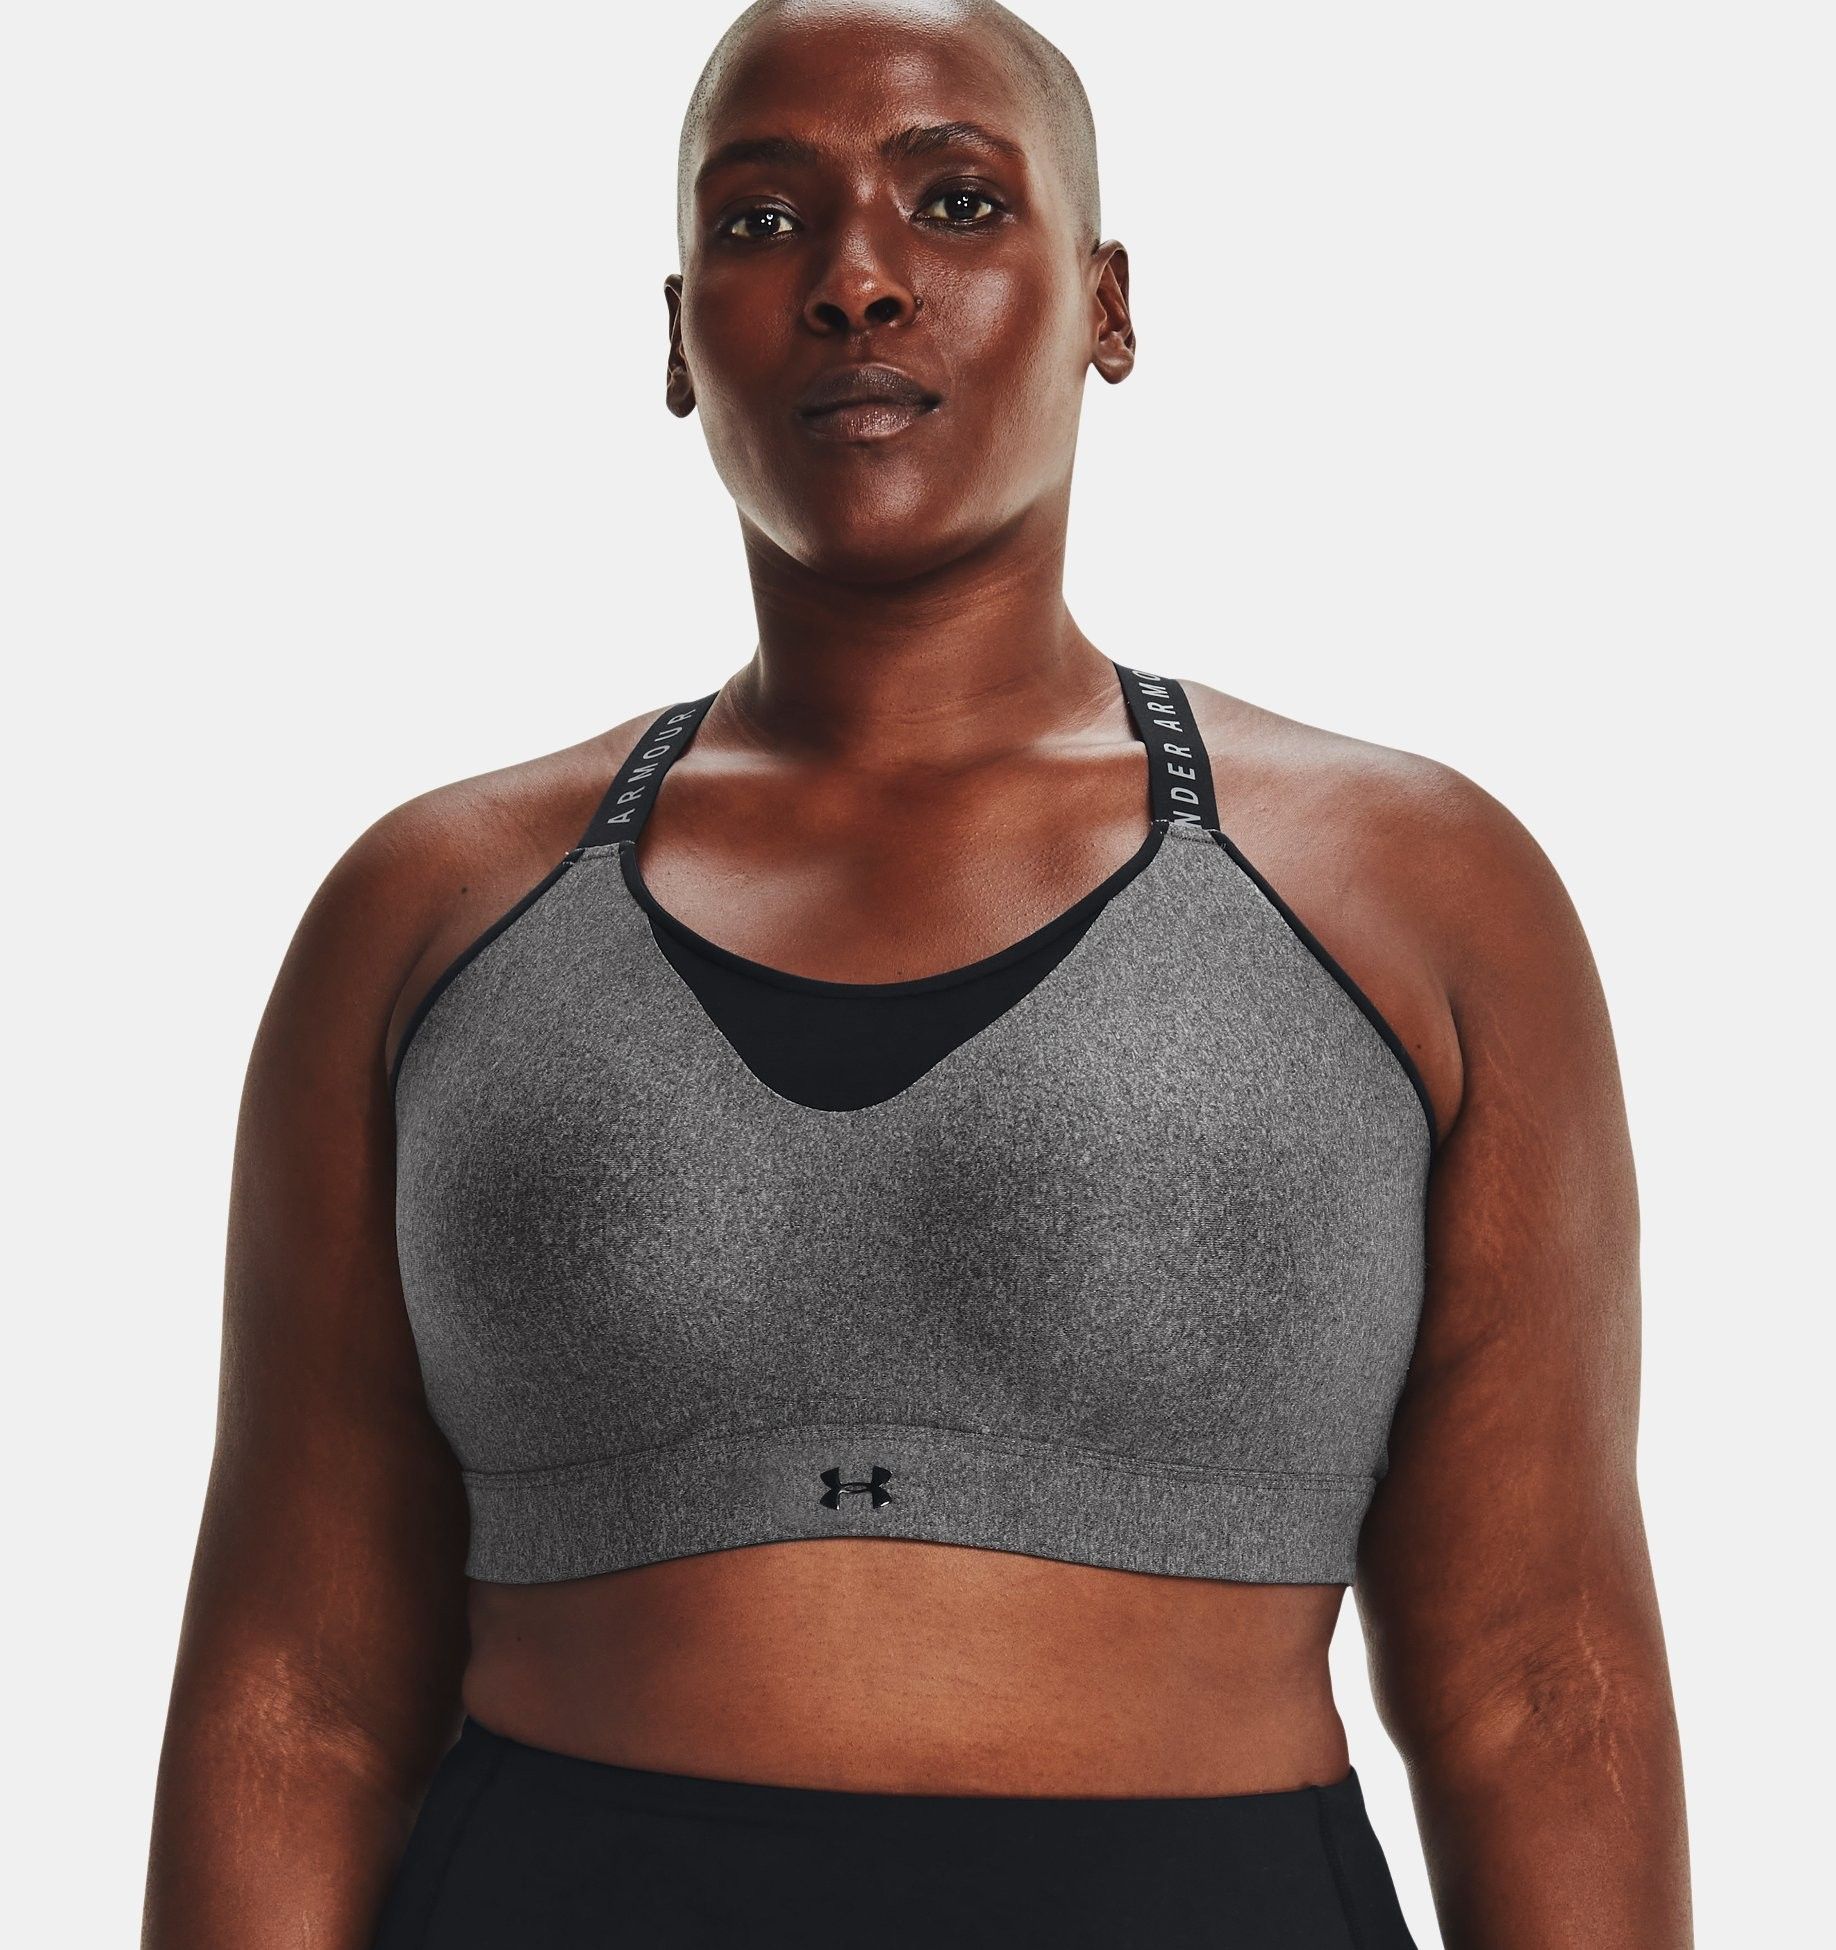 Active Shaping Sports Bra